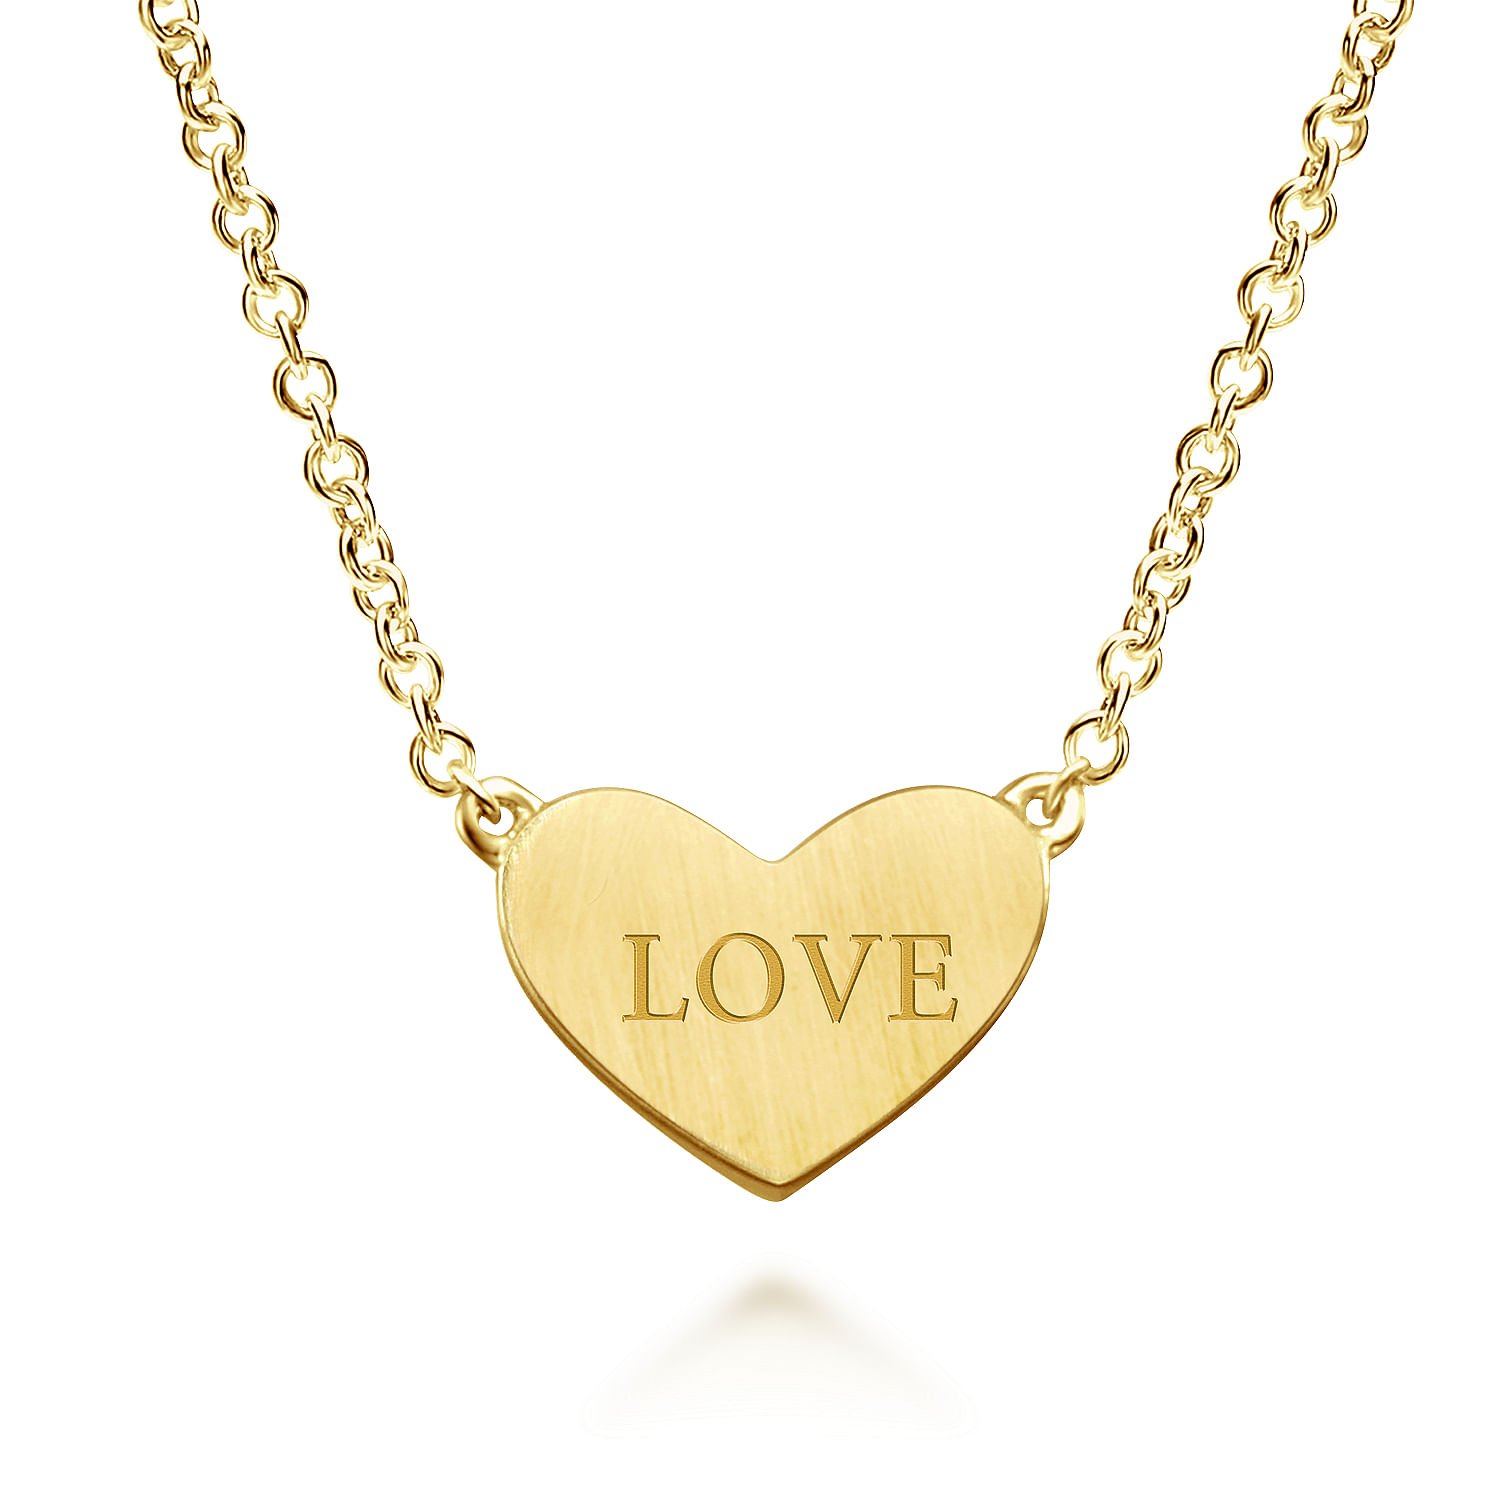 14K Yellow Gold Heart Pendant Necklace with Diamond Accent